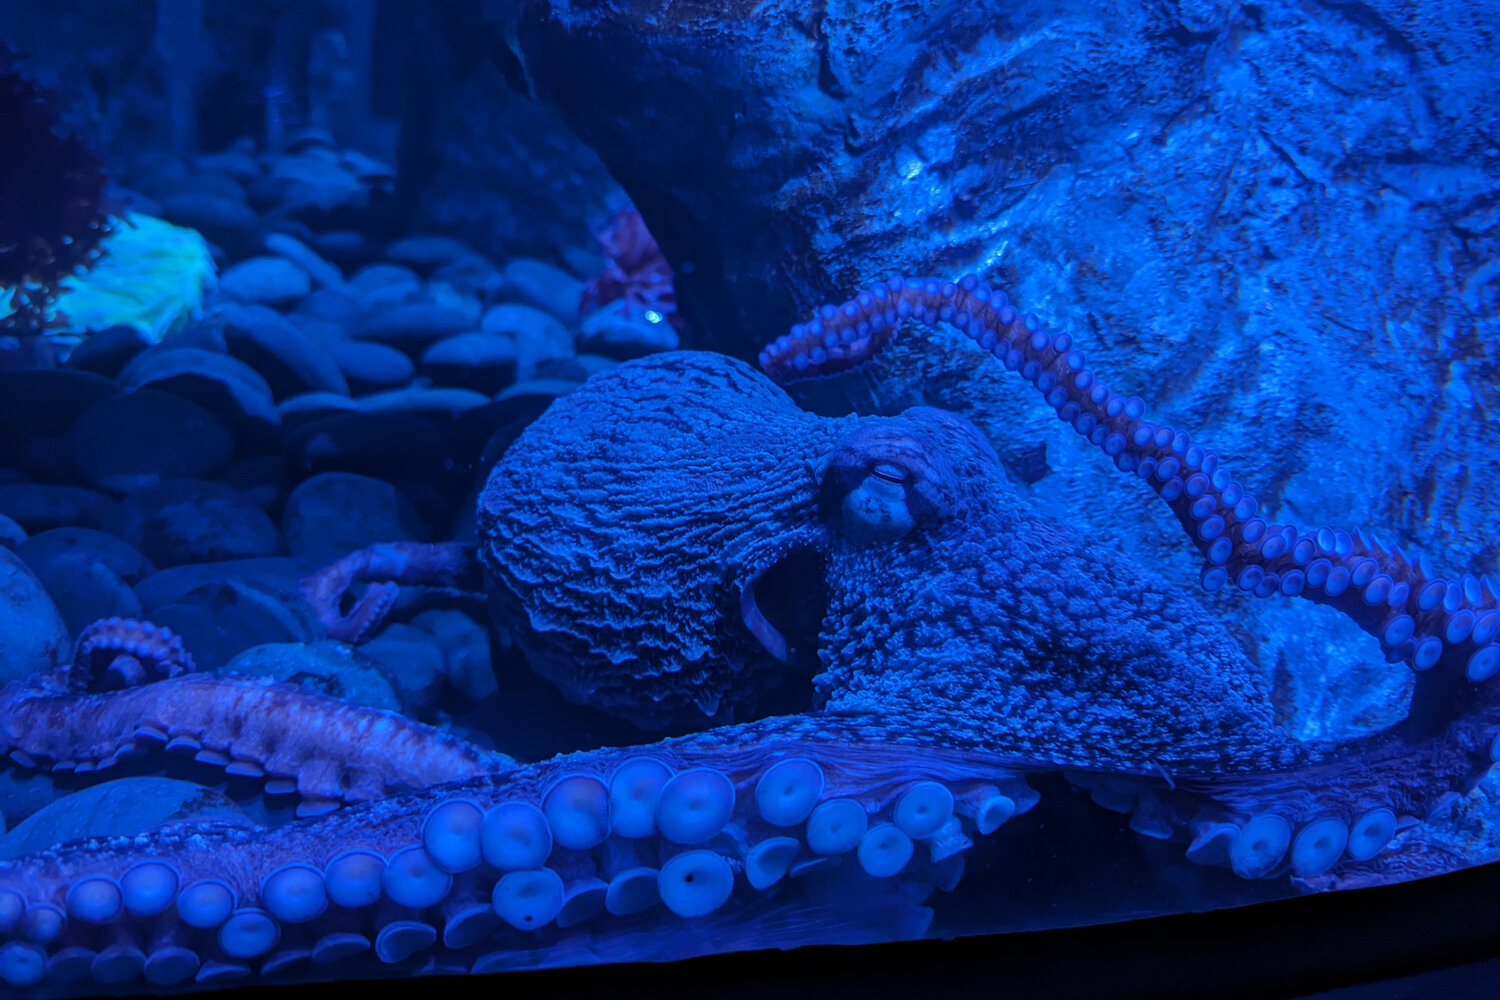 Giant Pacific octopus Susan recently arrived at the Riverbanks Zoo.